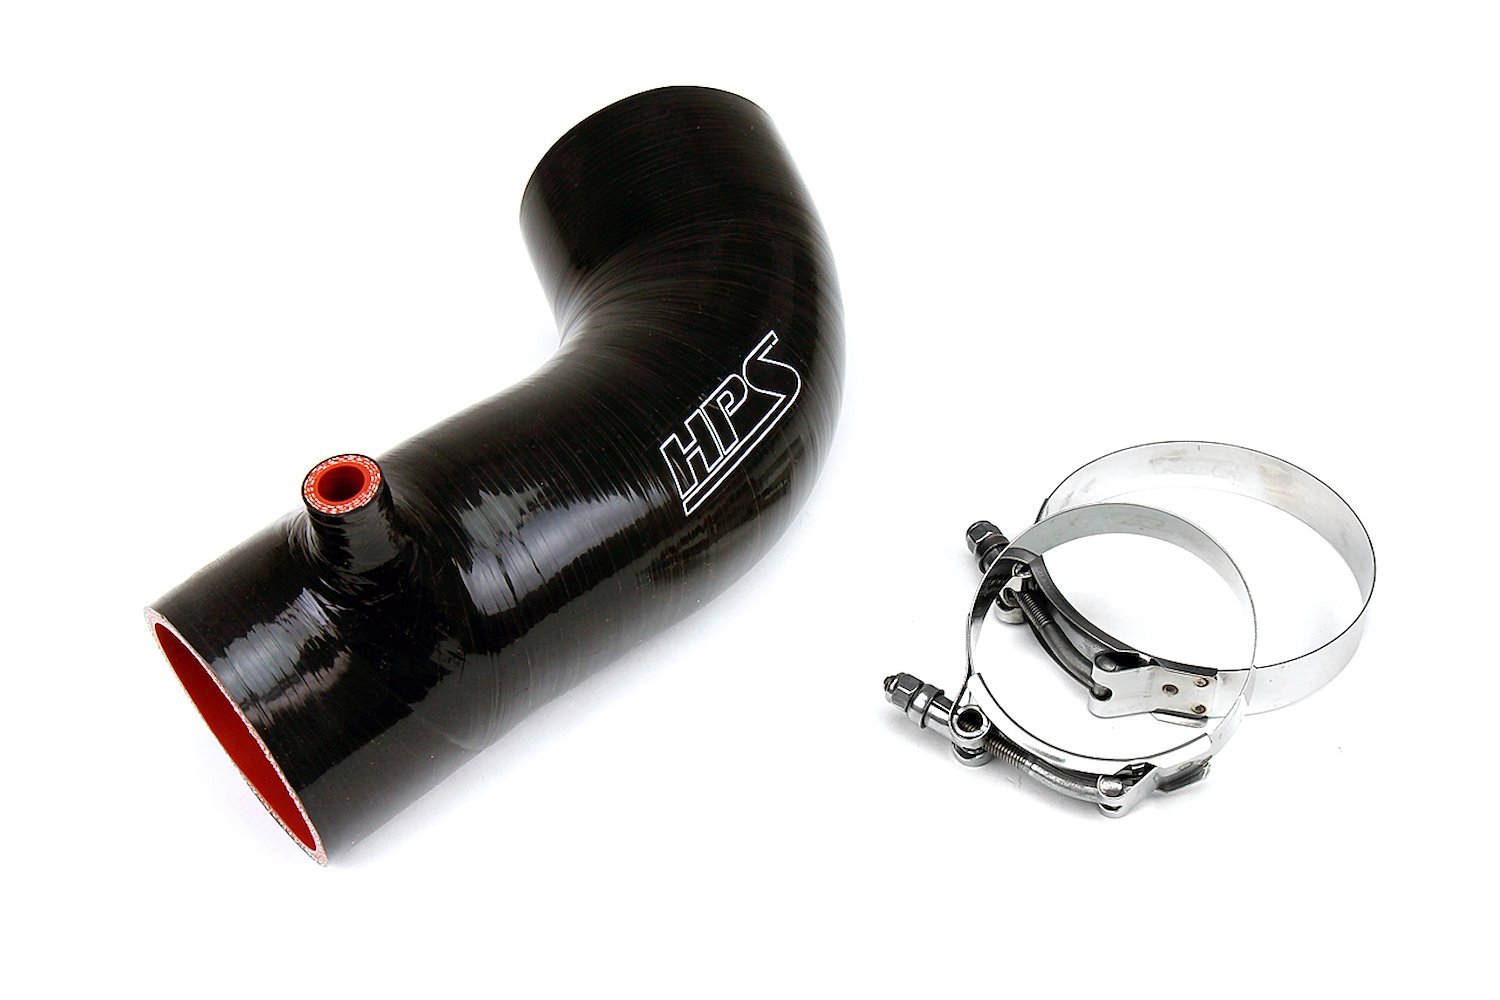 17838-BLK Silicone Air Intake, Dyno Proven +4.3 HP, +3.9 TQ, High Air Flow, Better Throttle Response